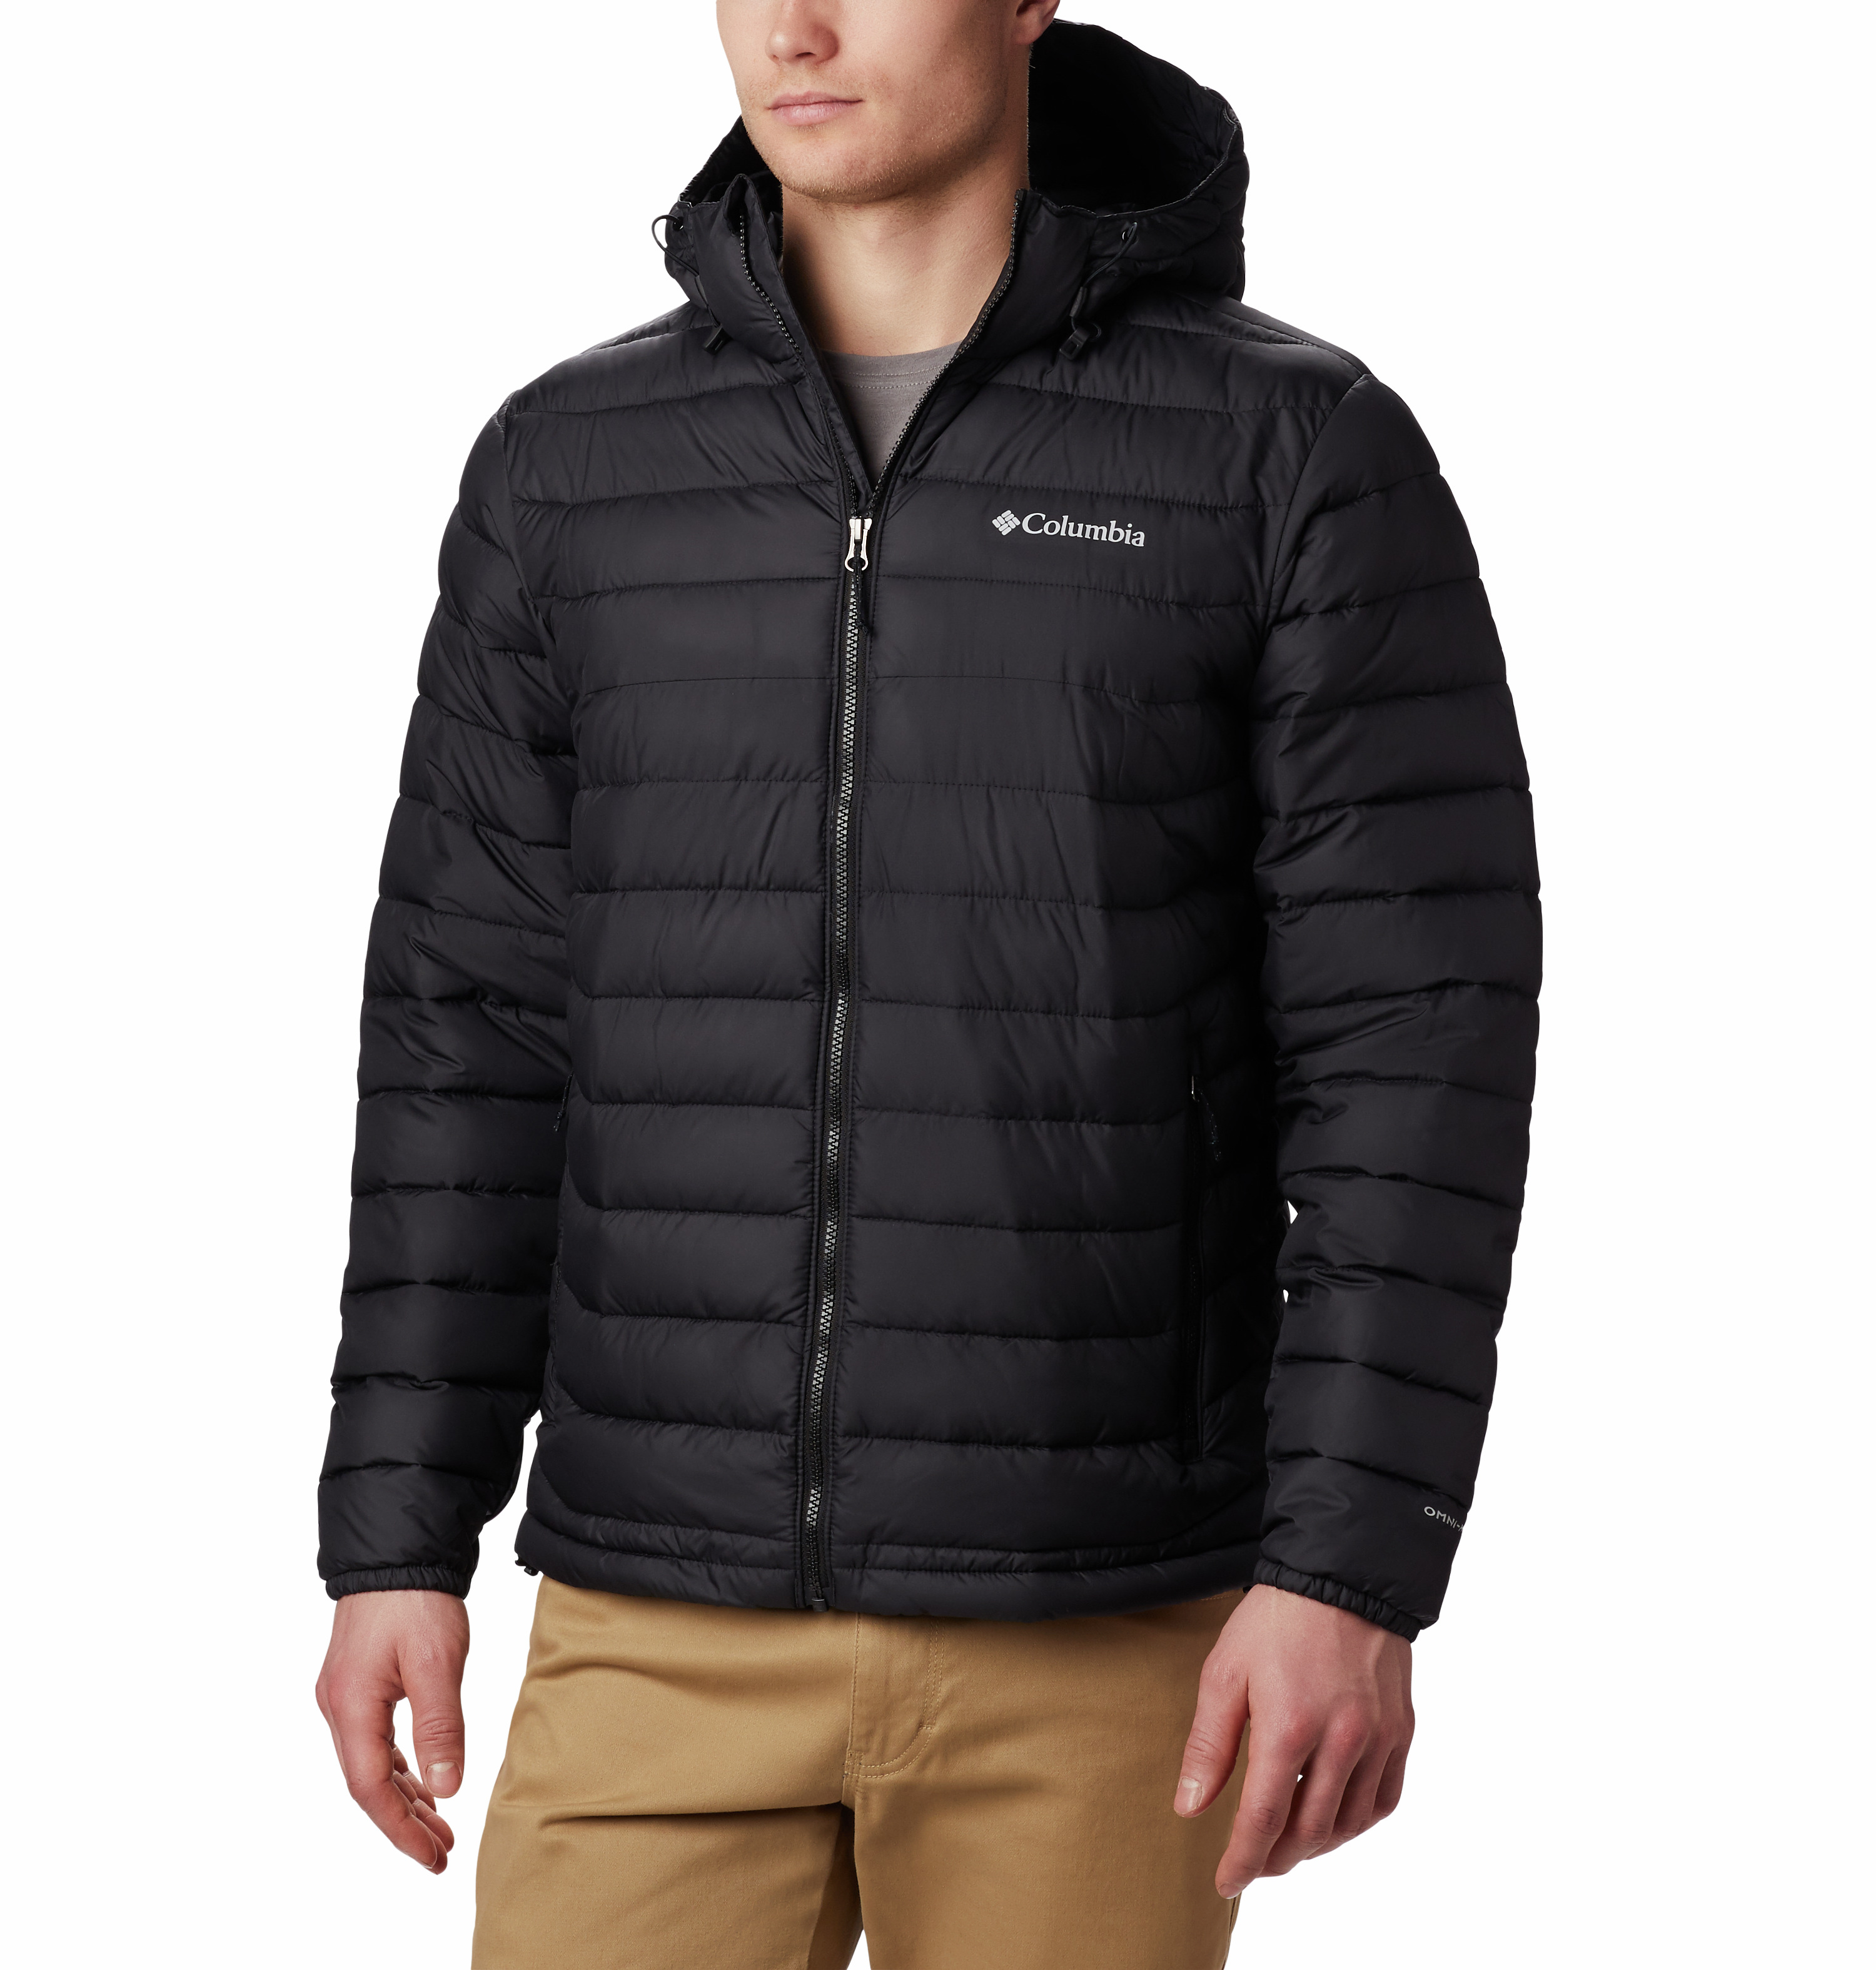 Columbia Powder Lite Hooded Jacket - Insulated jacket - Men's